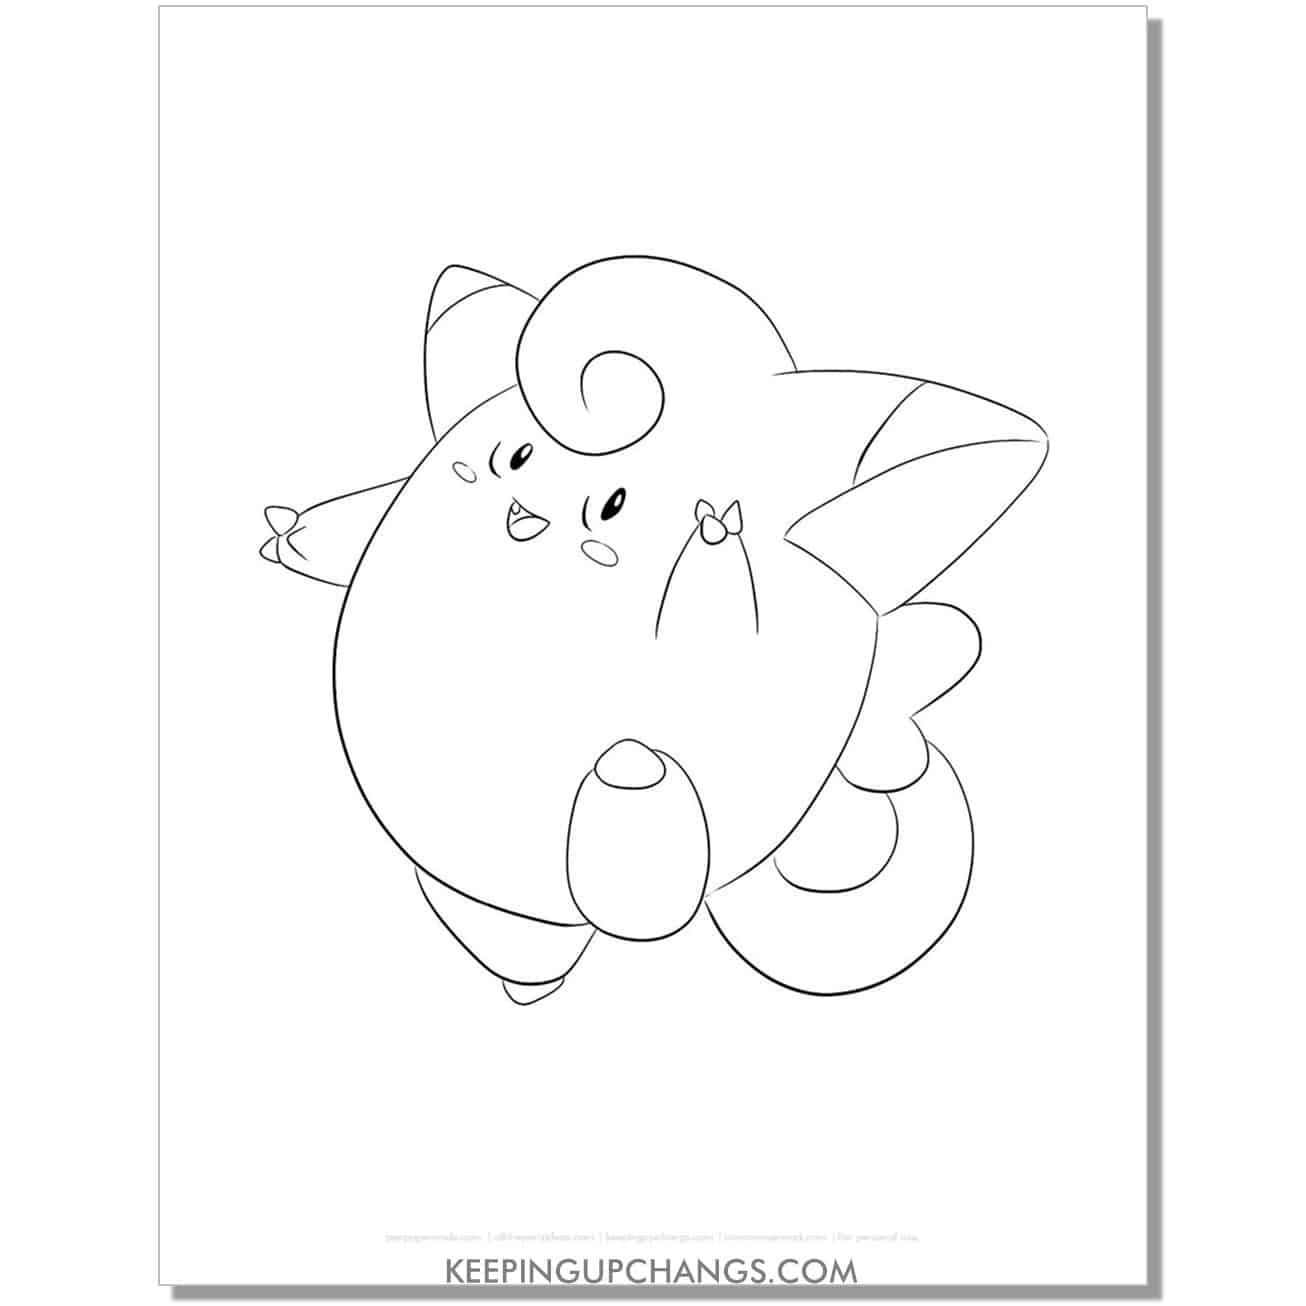 clefairy jumping pokemon coloring page, sheet.